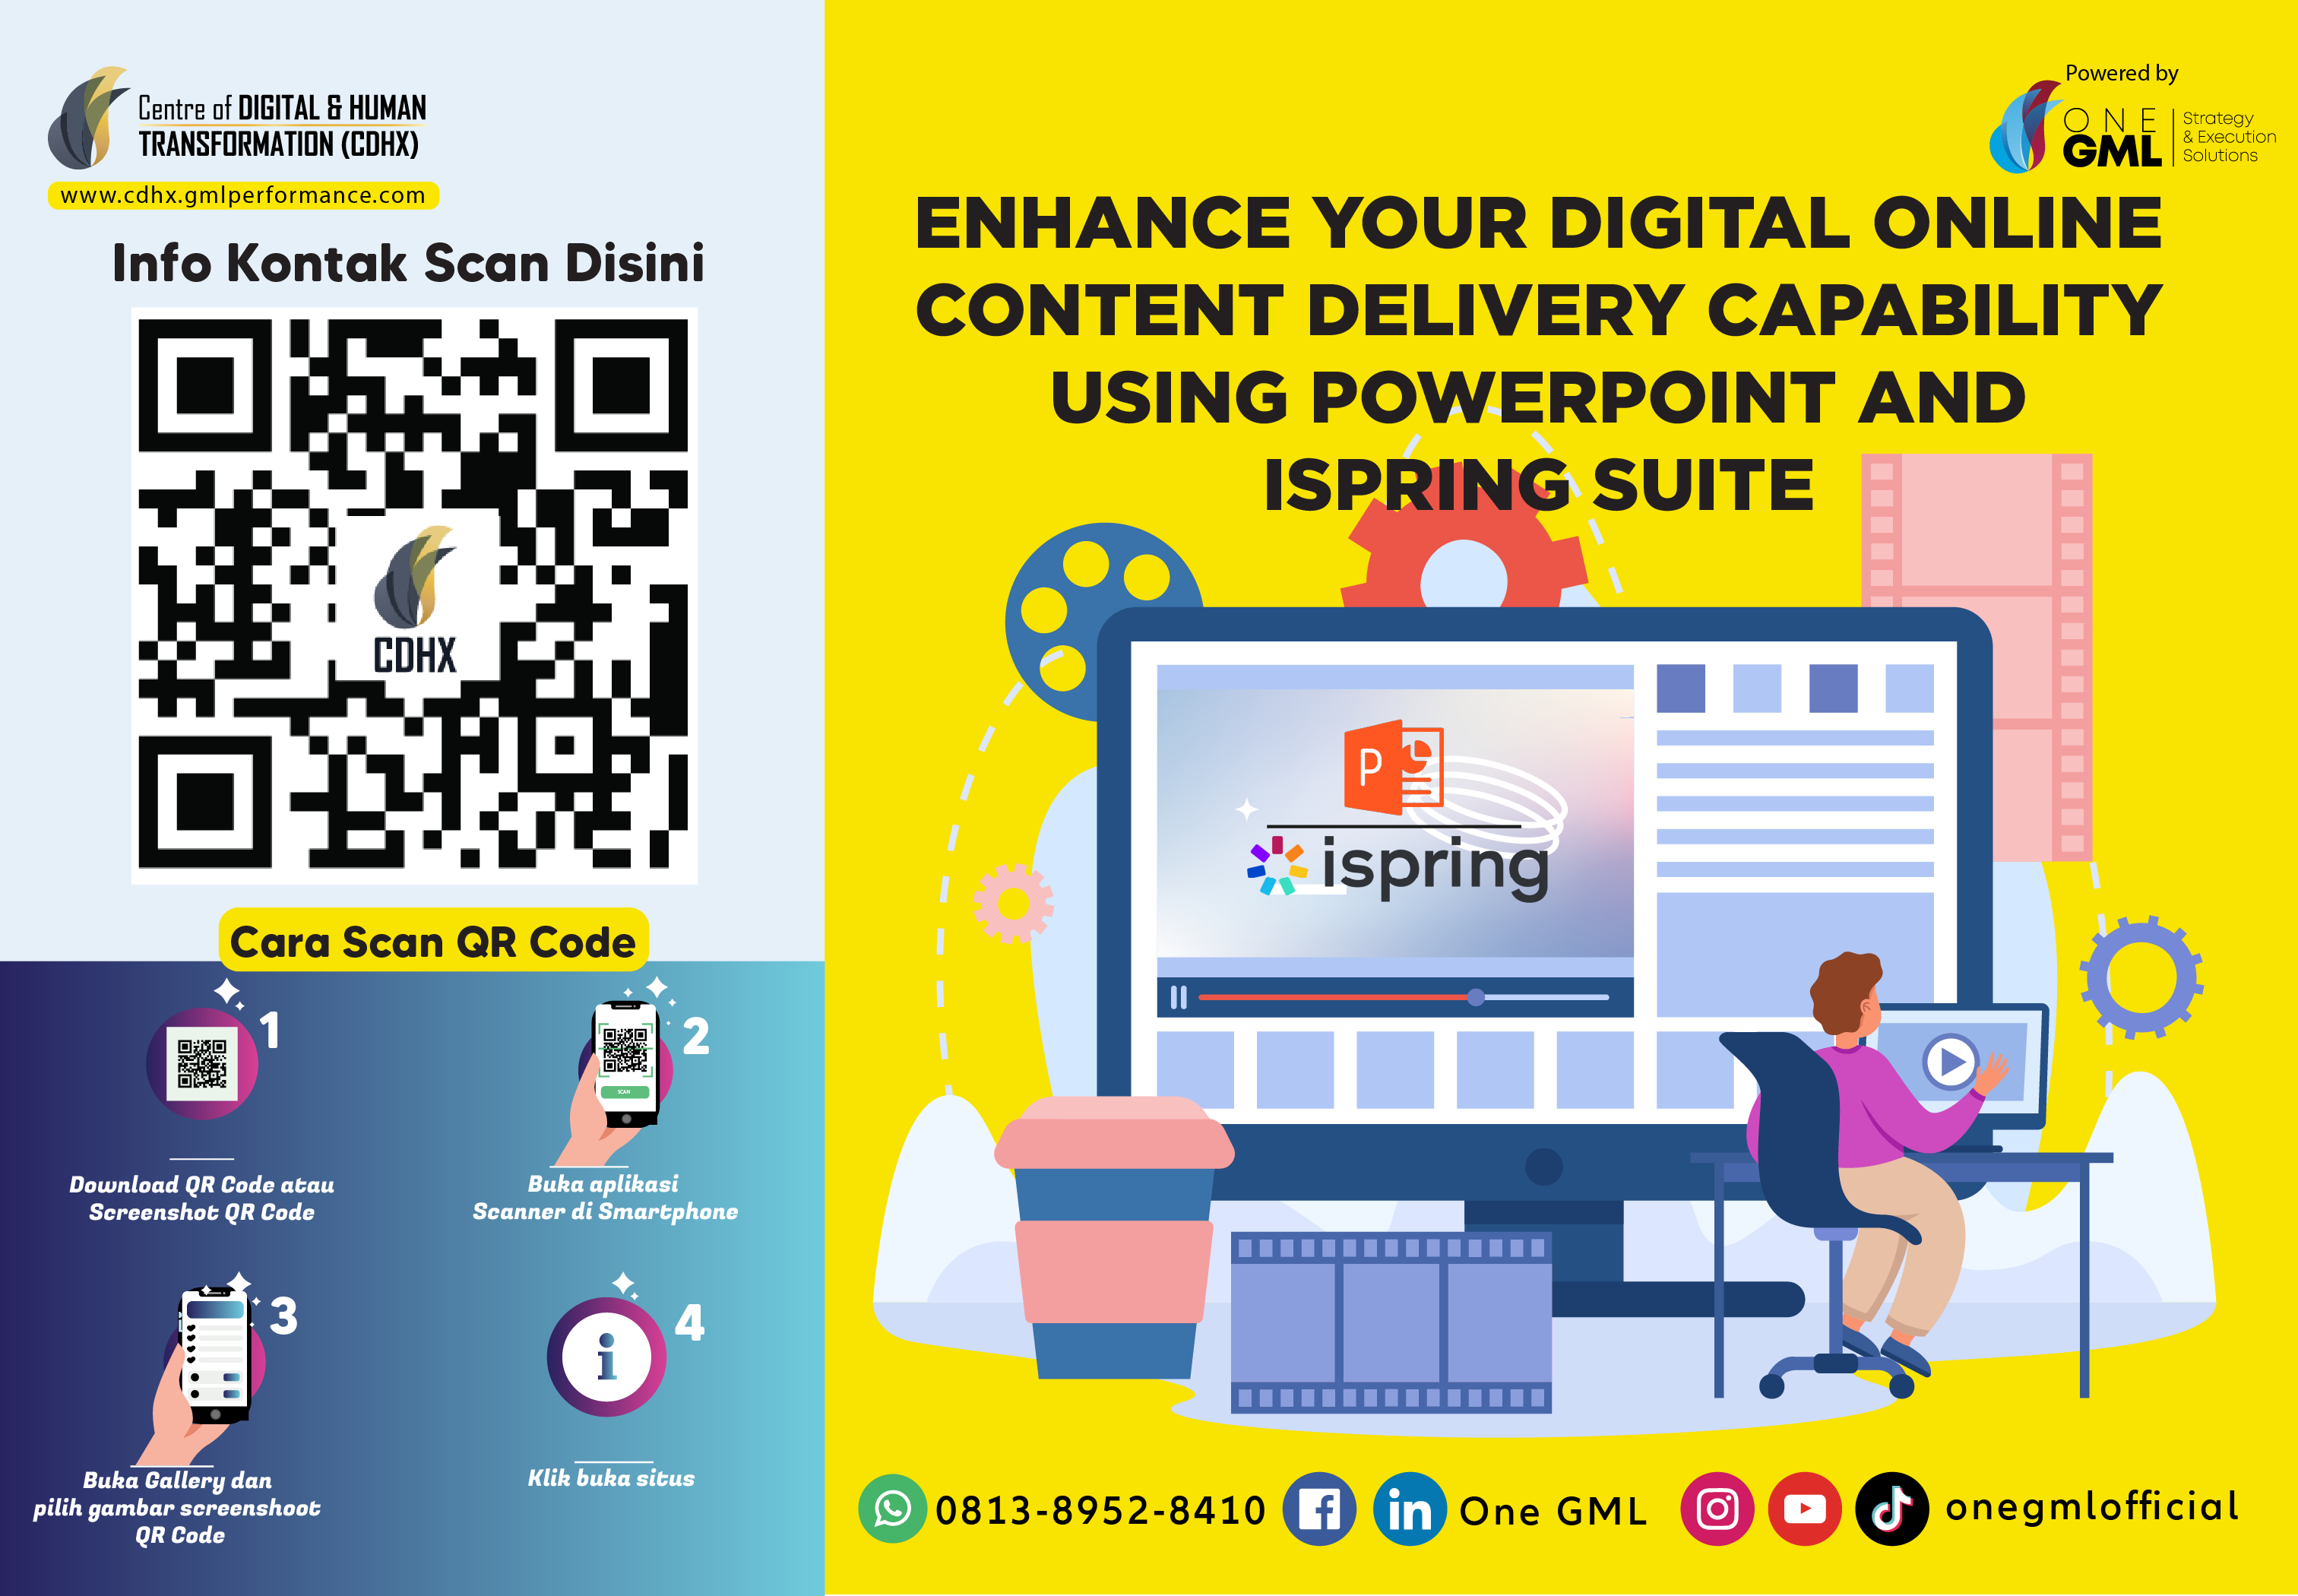 Enhance your Digital Online Content Delivery Capability using PowerPoint and Ispring Suite